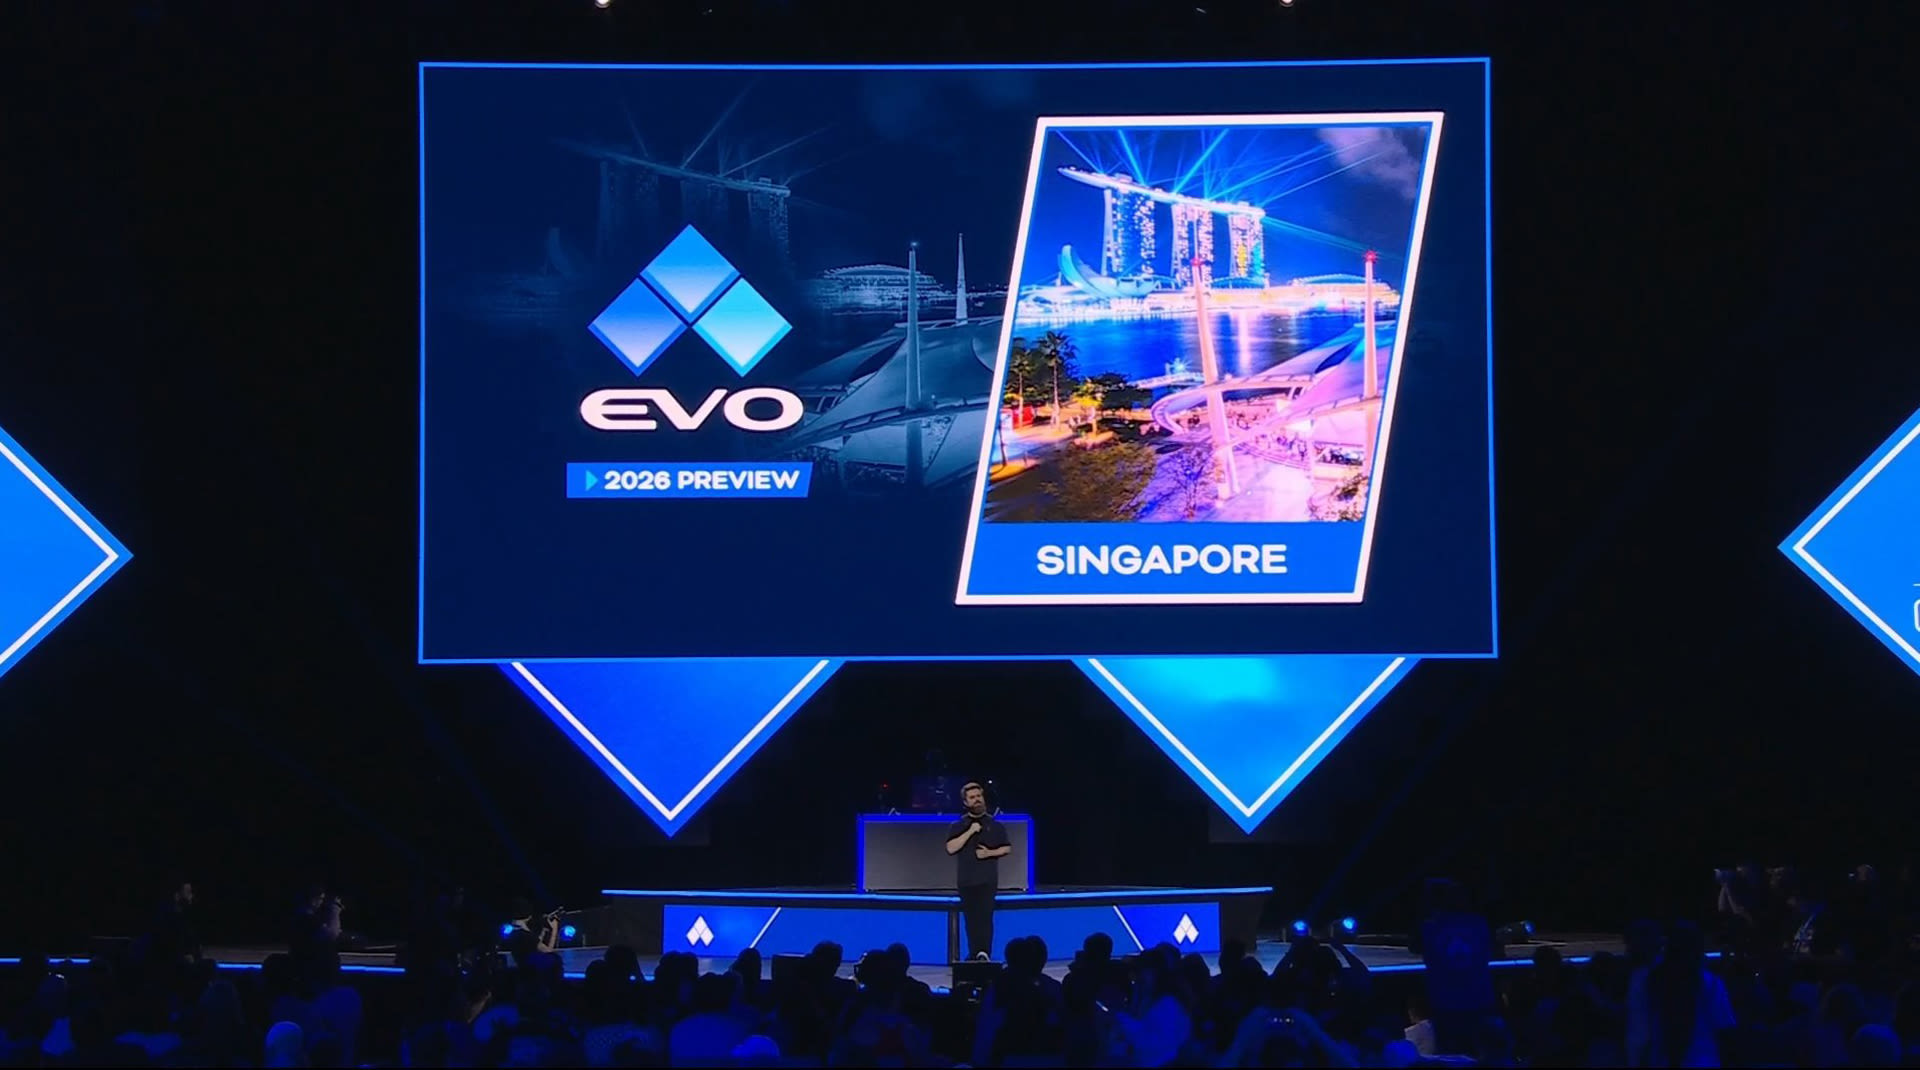 EVO is expanding to France and Singapore